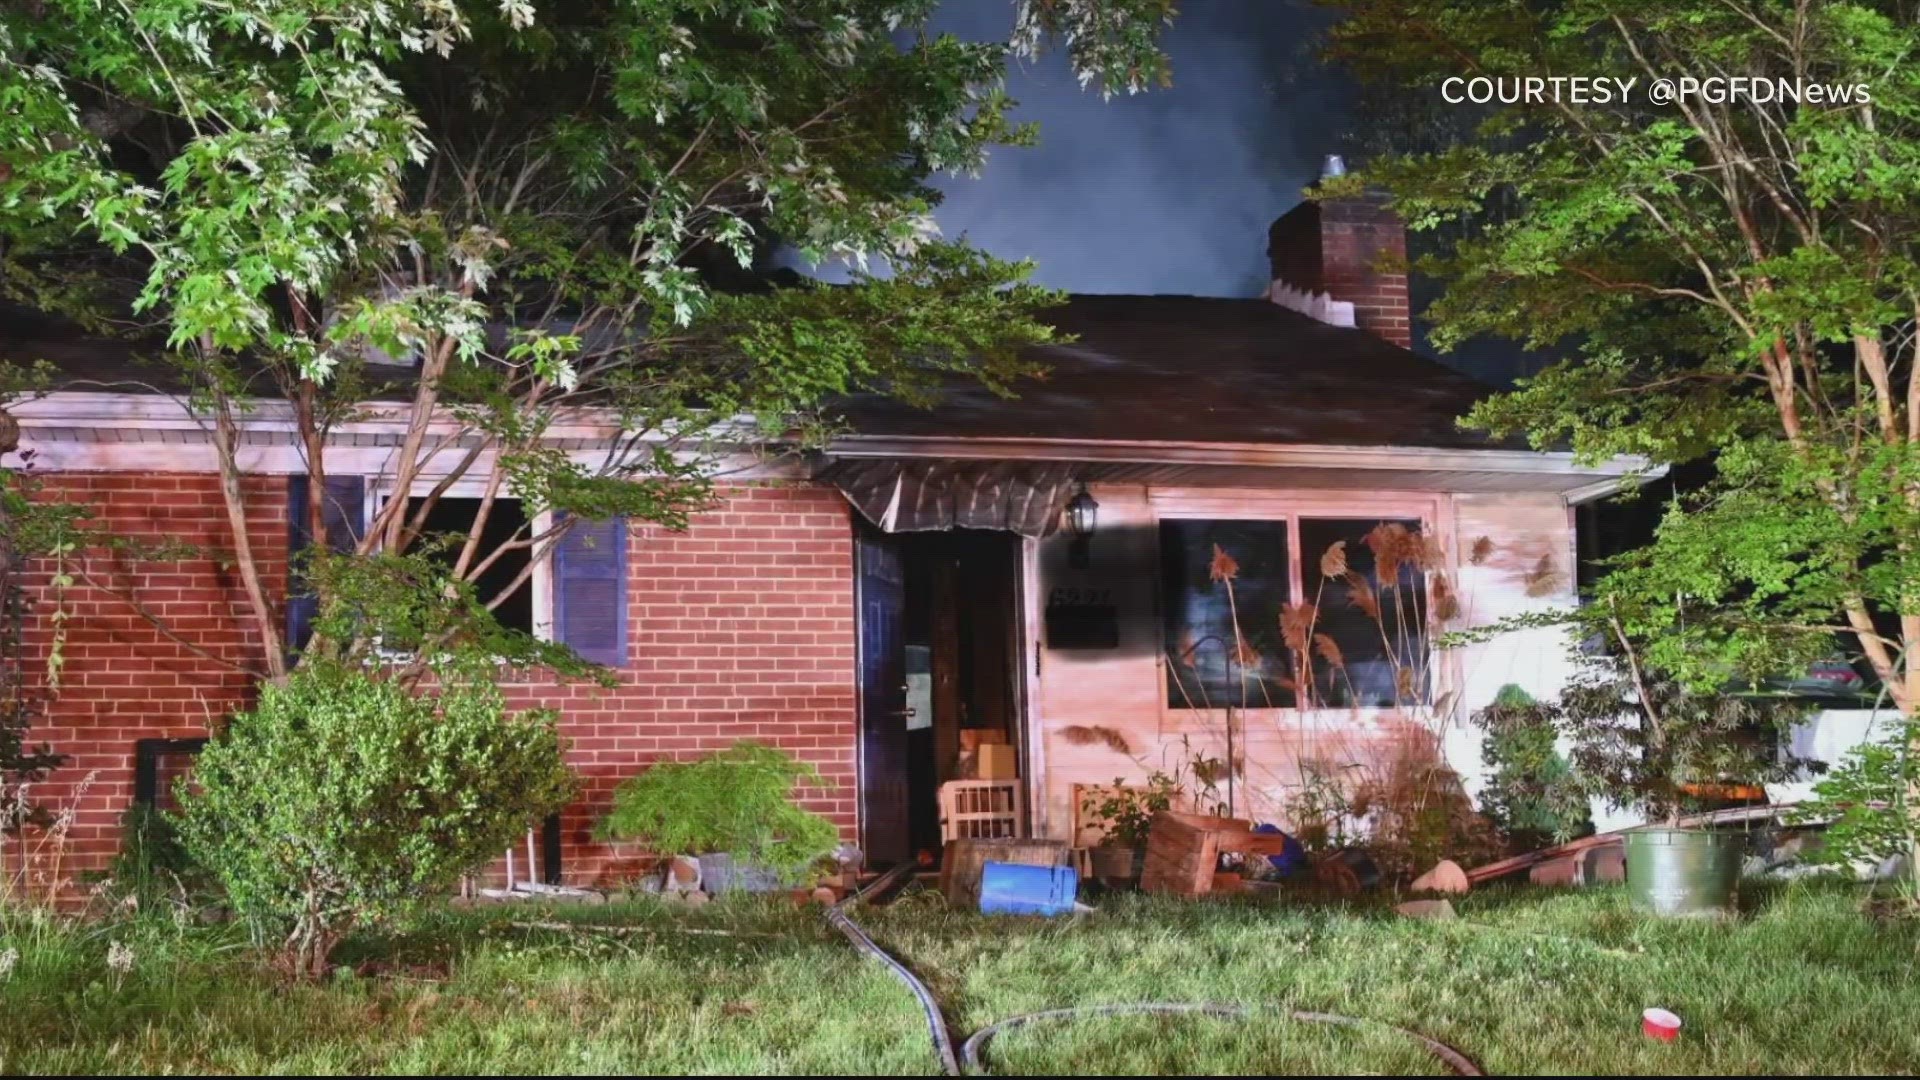 The investigation into the cause of an overnight fire in Prince George's County is just getting underway right now.